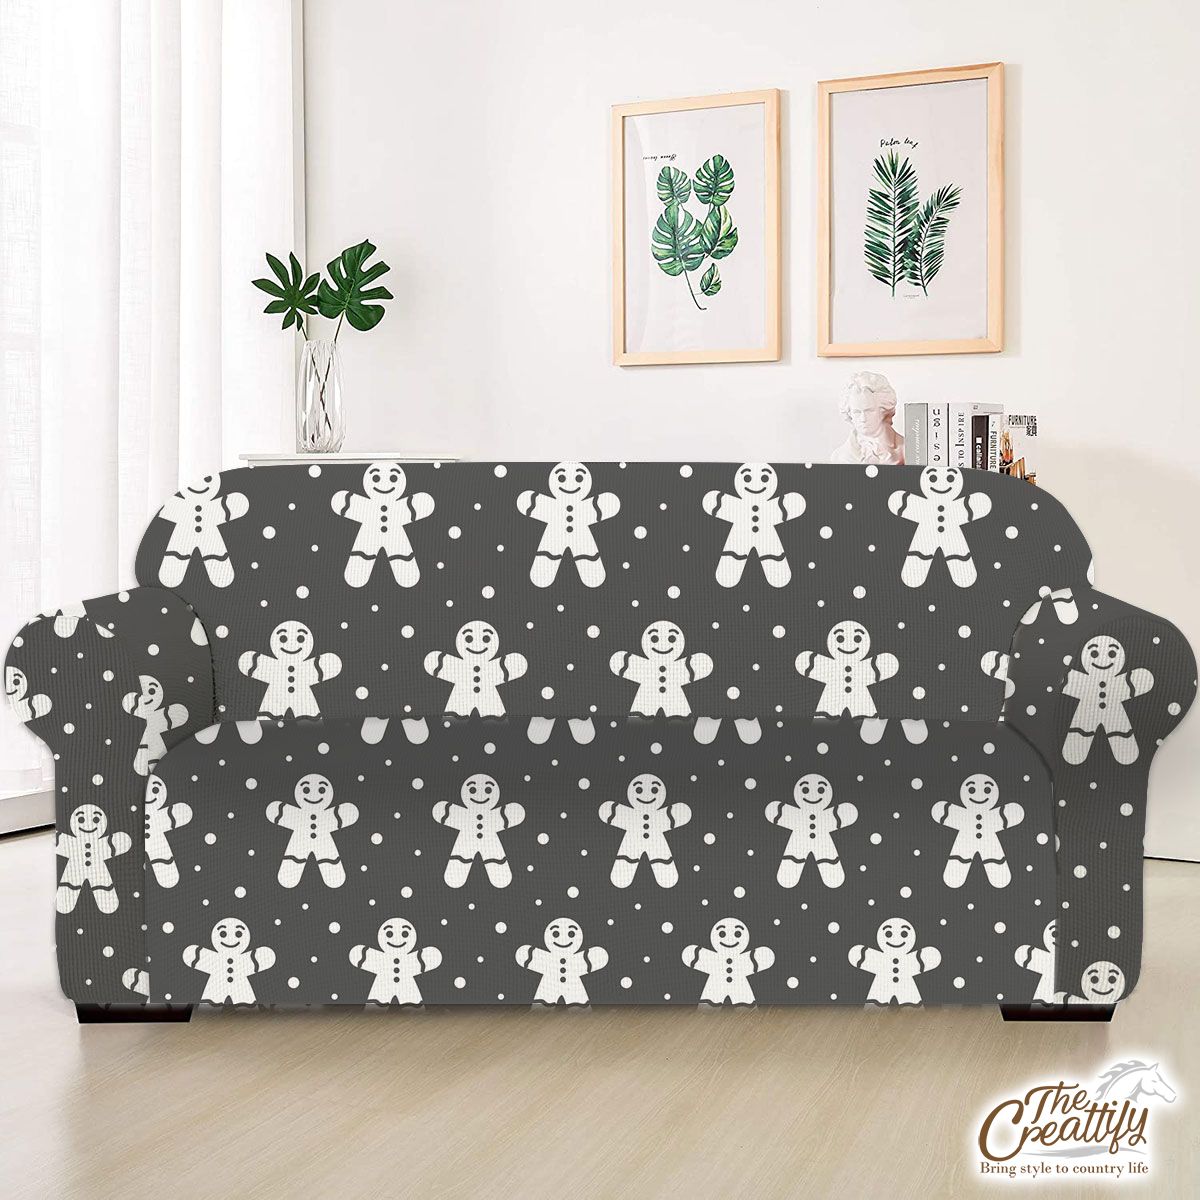 Grey And White Gingerbread Man Sofa Cover